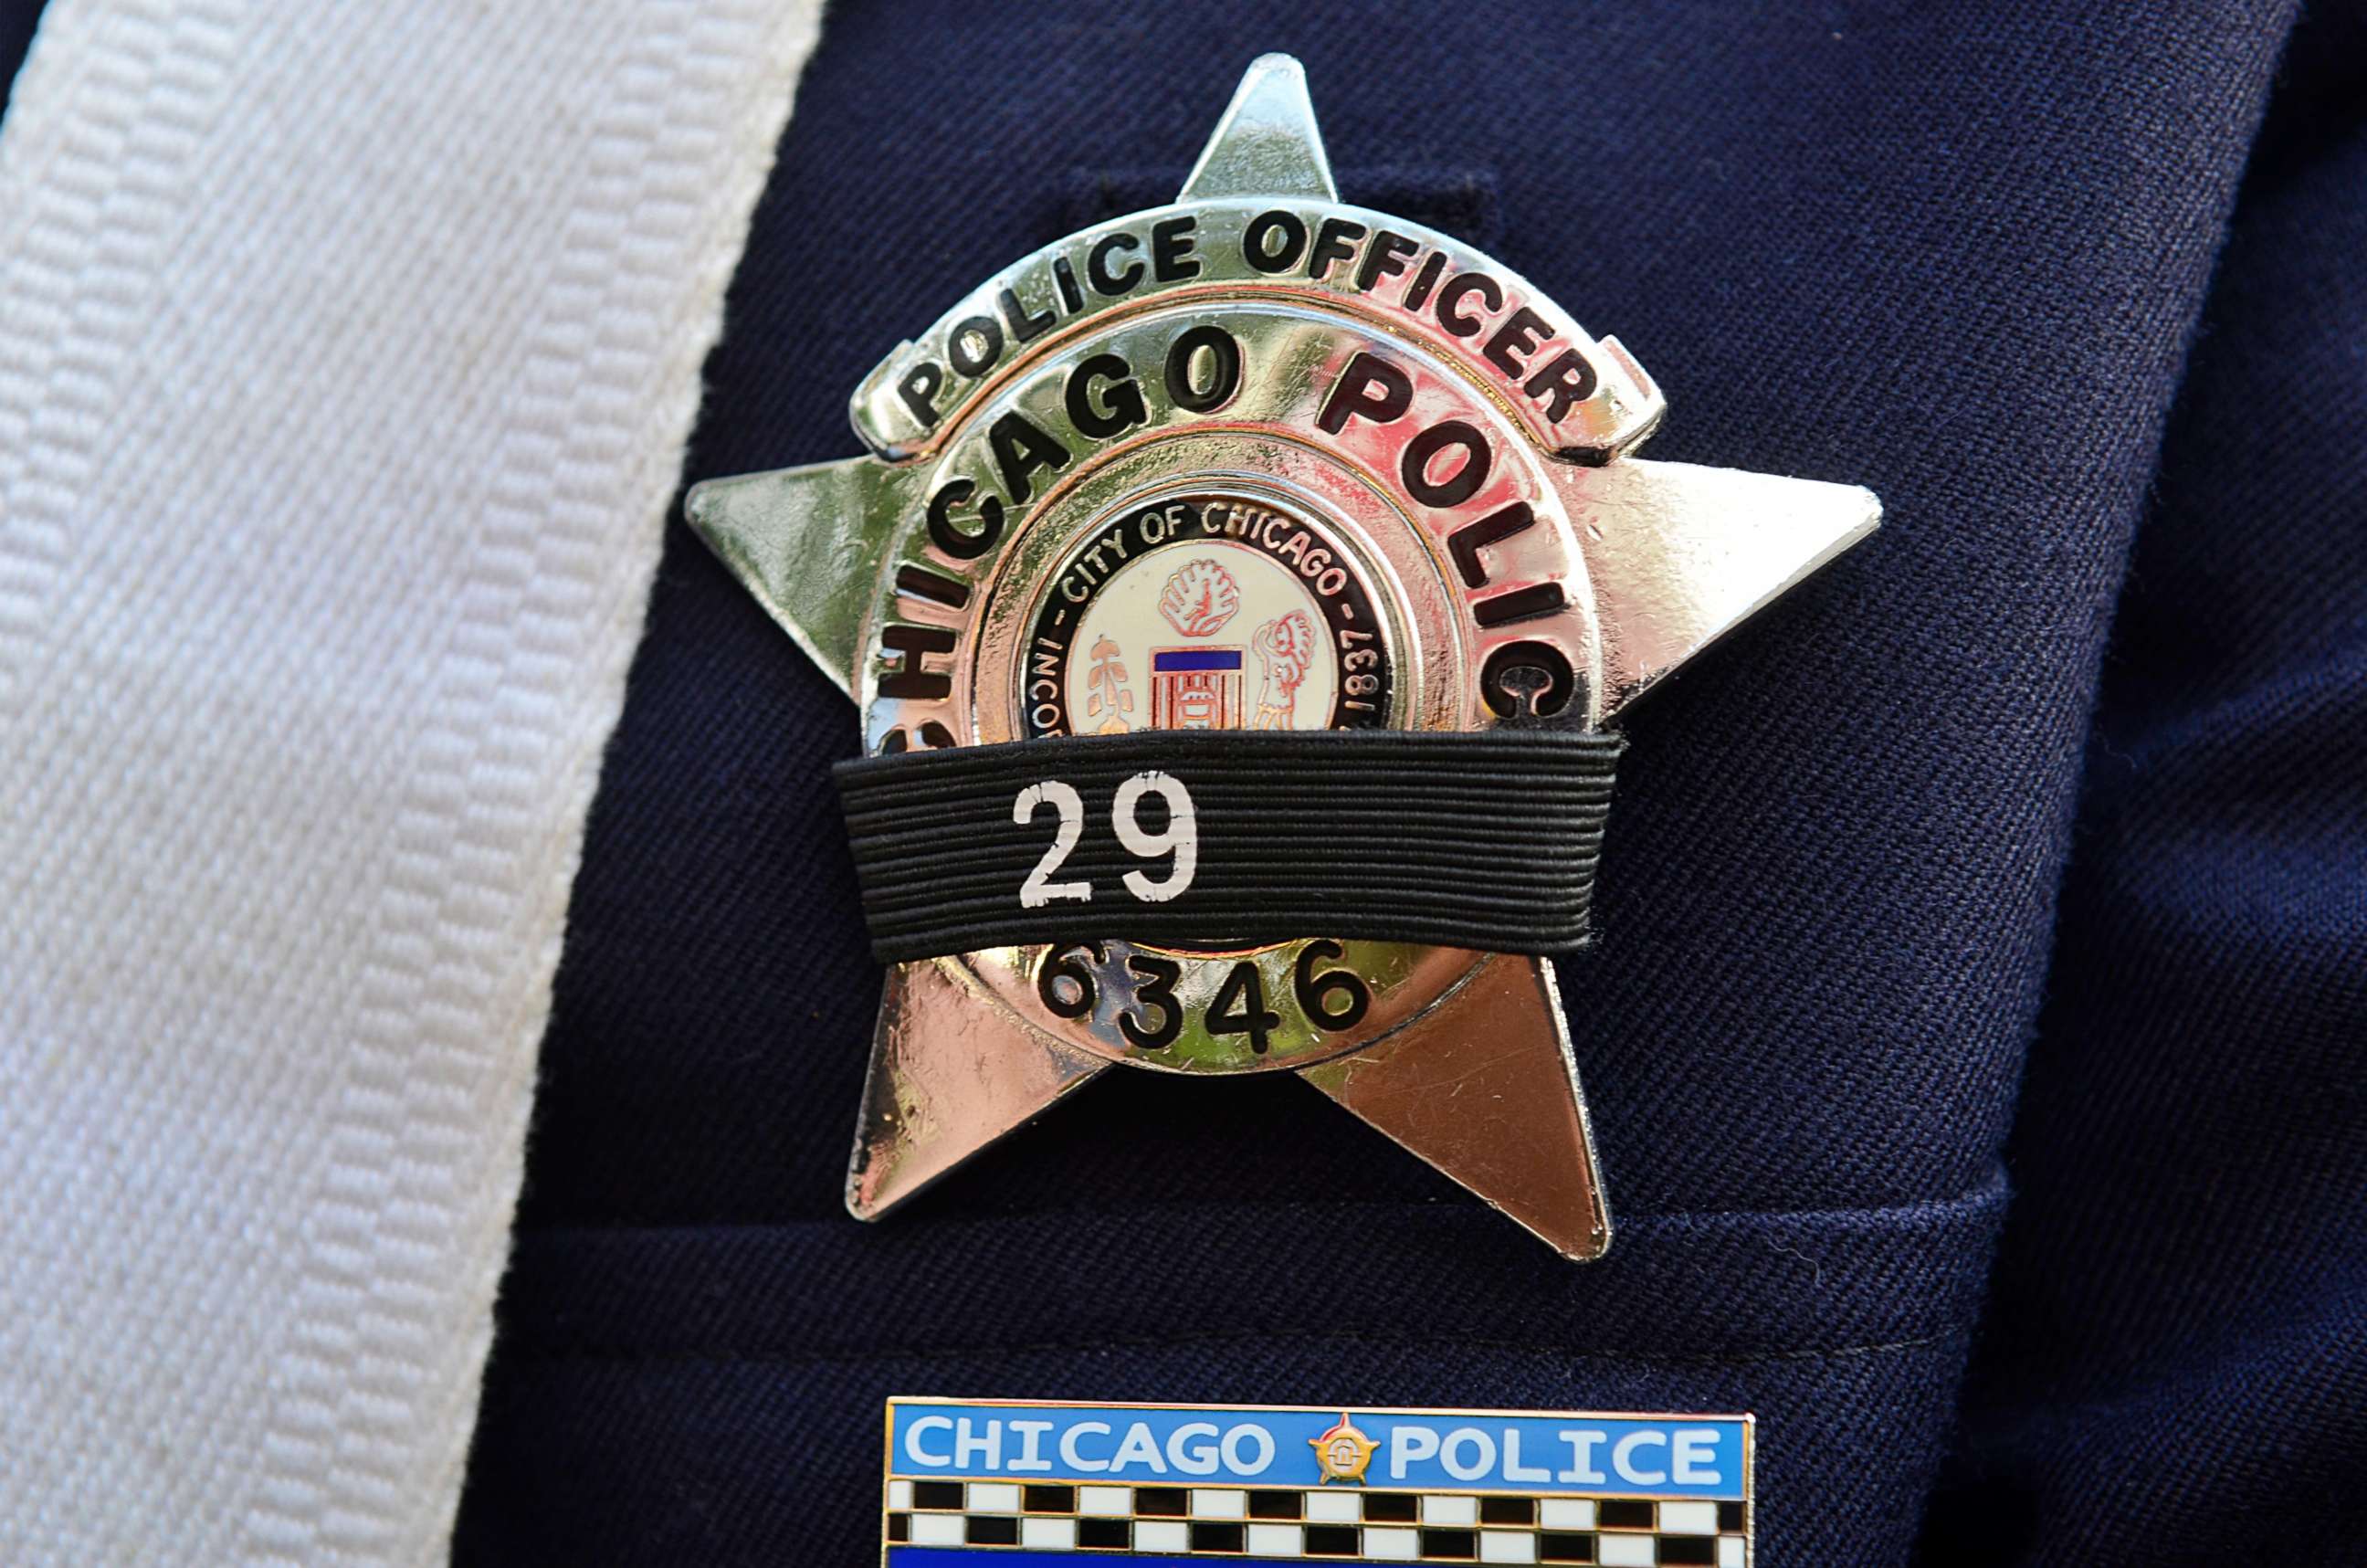 PHOTO: A police officer's badge is covered in a black band at a prayer vigil in remembrance of Police Officer Ella French and her wounded partner on Aug. 11, 2021, in Chicago.